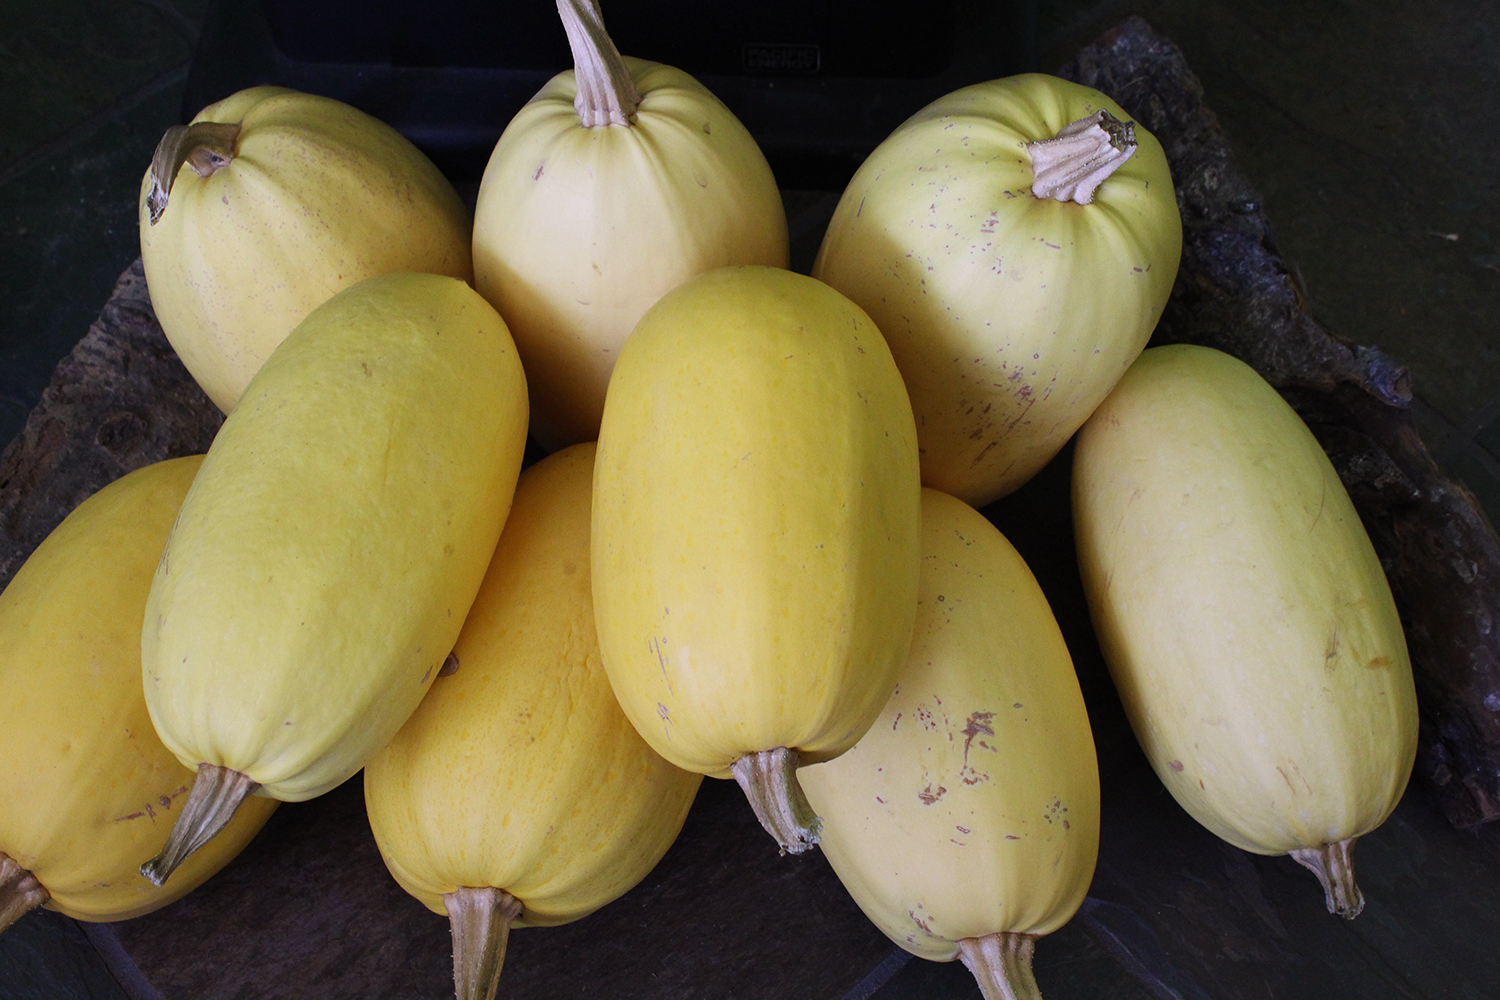 a stack of spaghetti squash - Rural Dreamsfrom our food storage